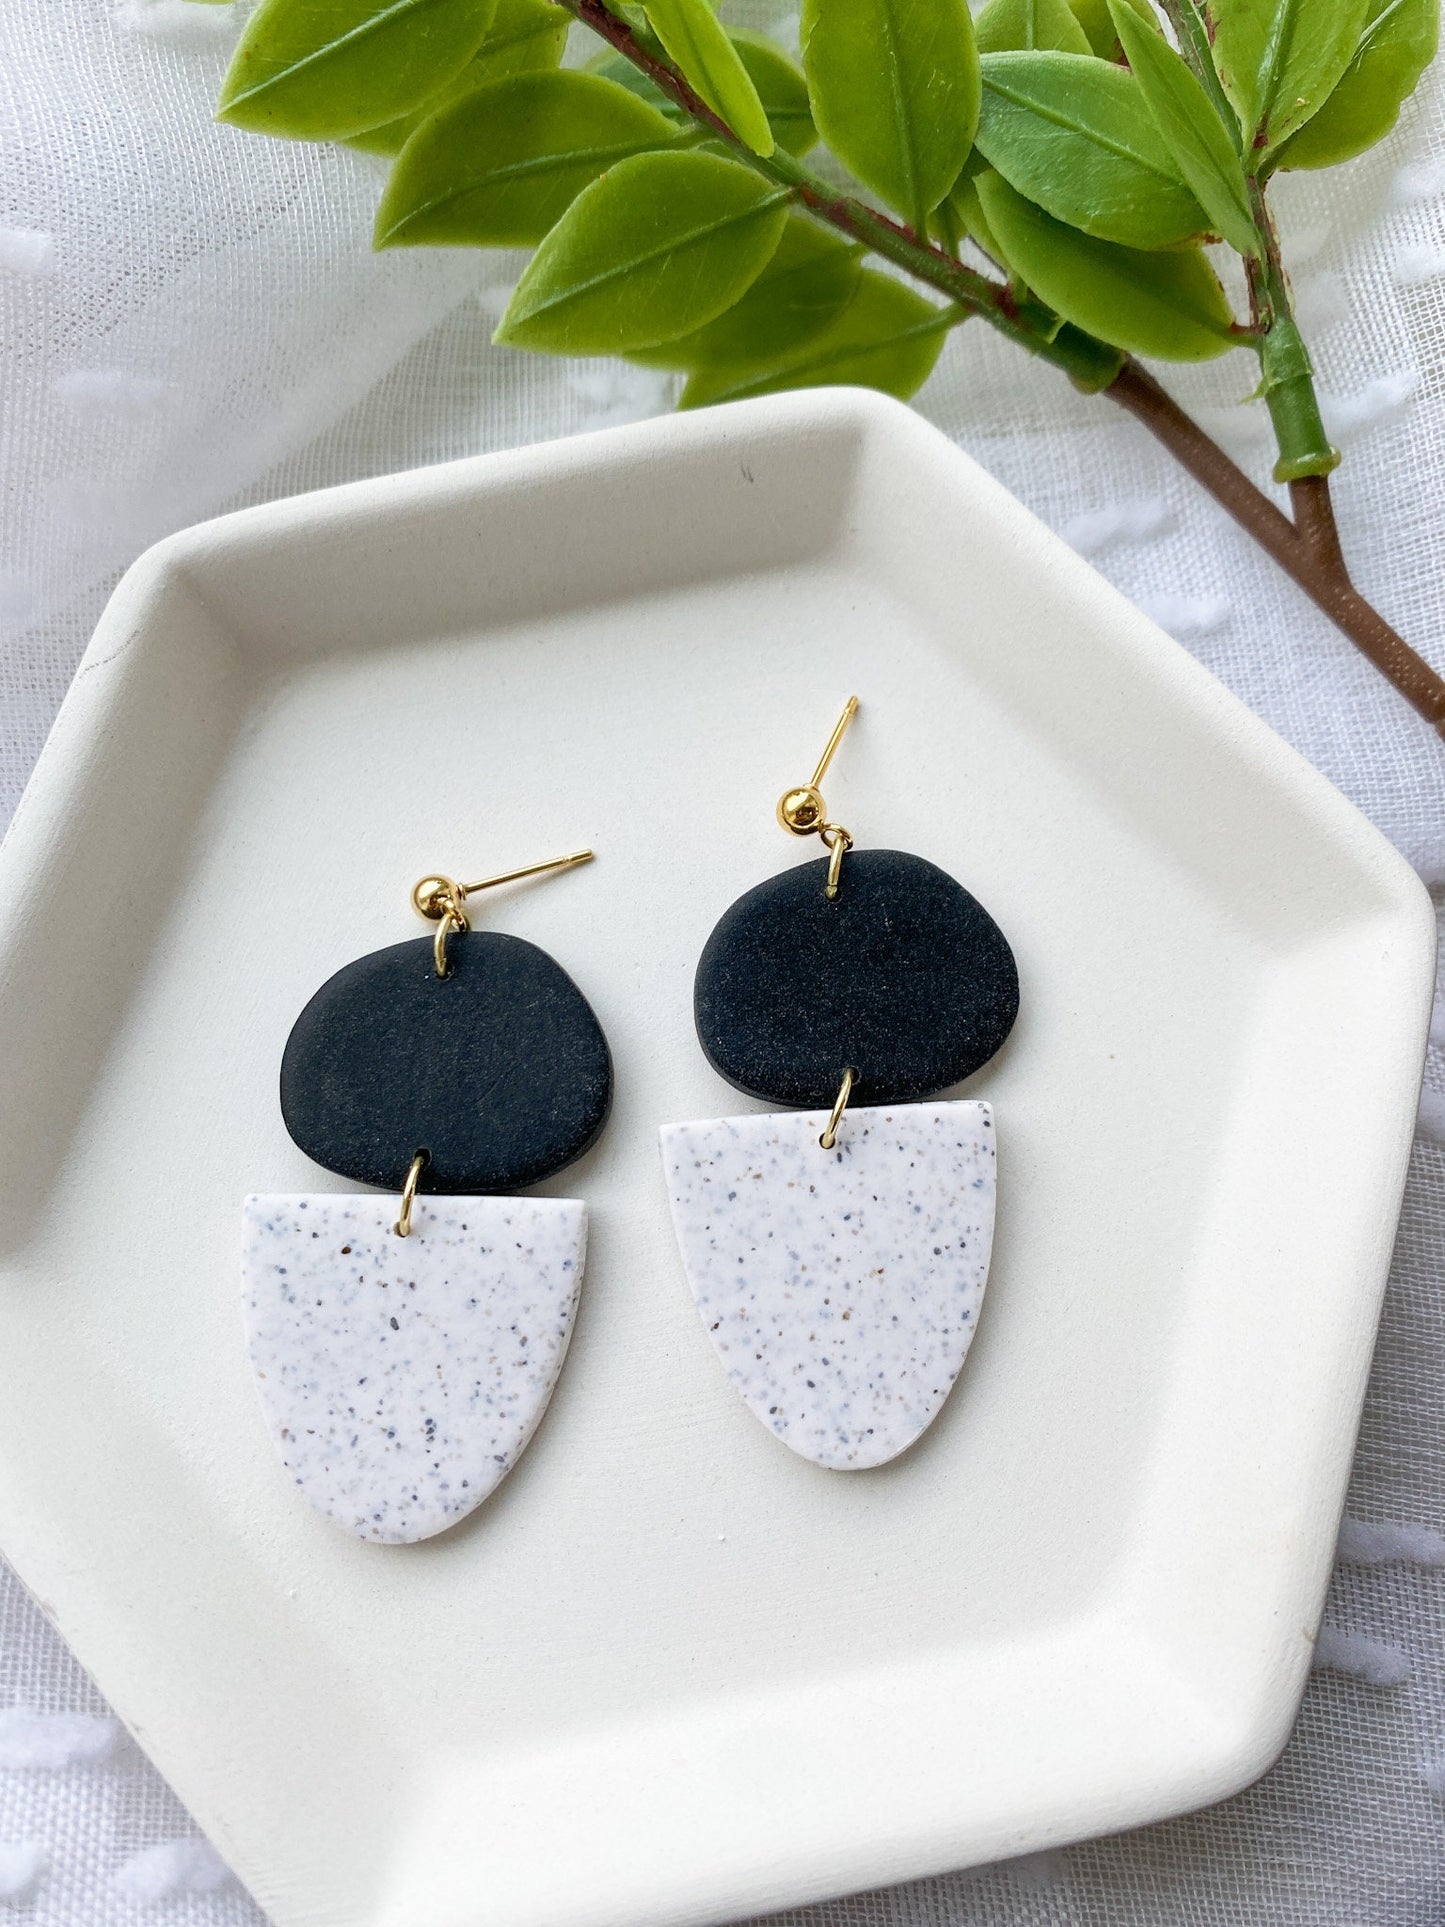 Speckled White and Black Fancy Dangle Earrings |  Polymer Clay | 18kt Gold Plated Ball Posts | Fancy Earrings | Everyday Wear | Neutral